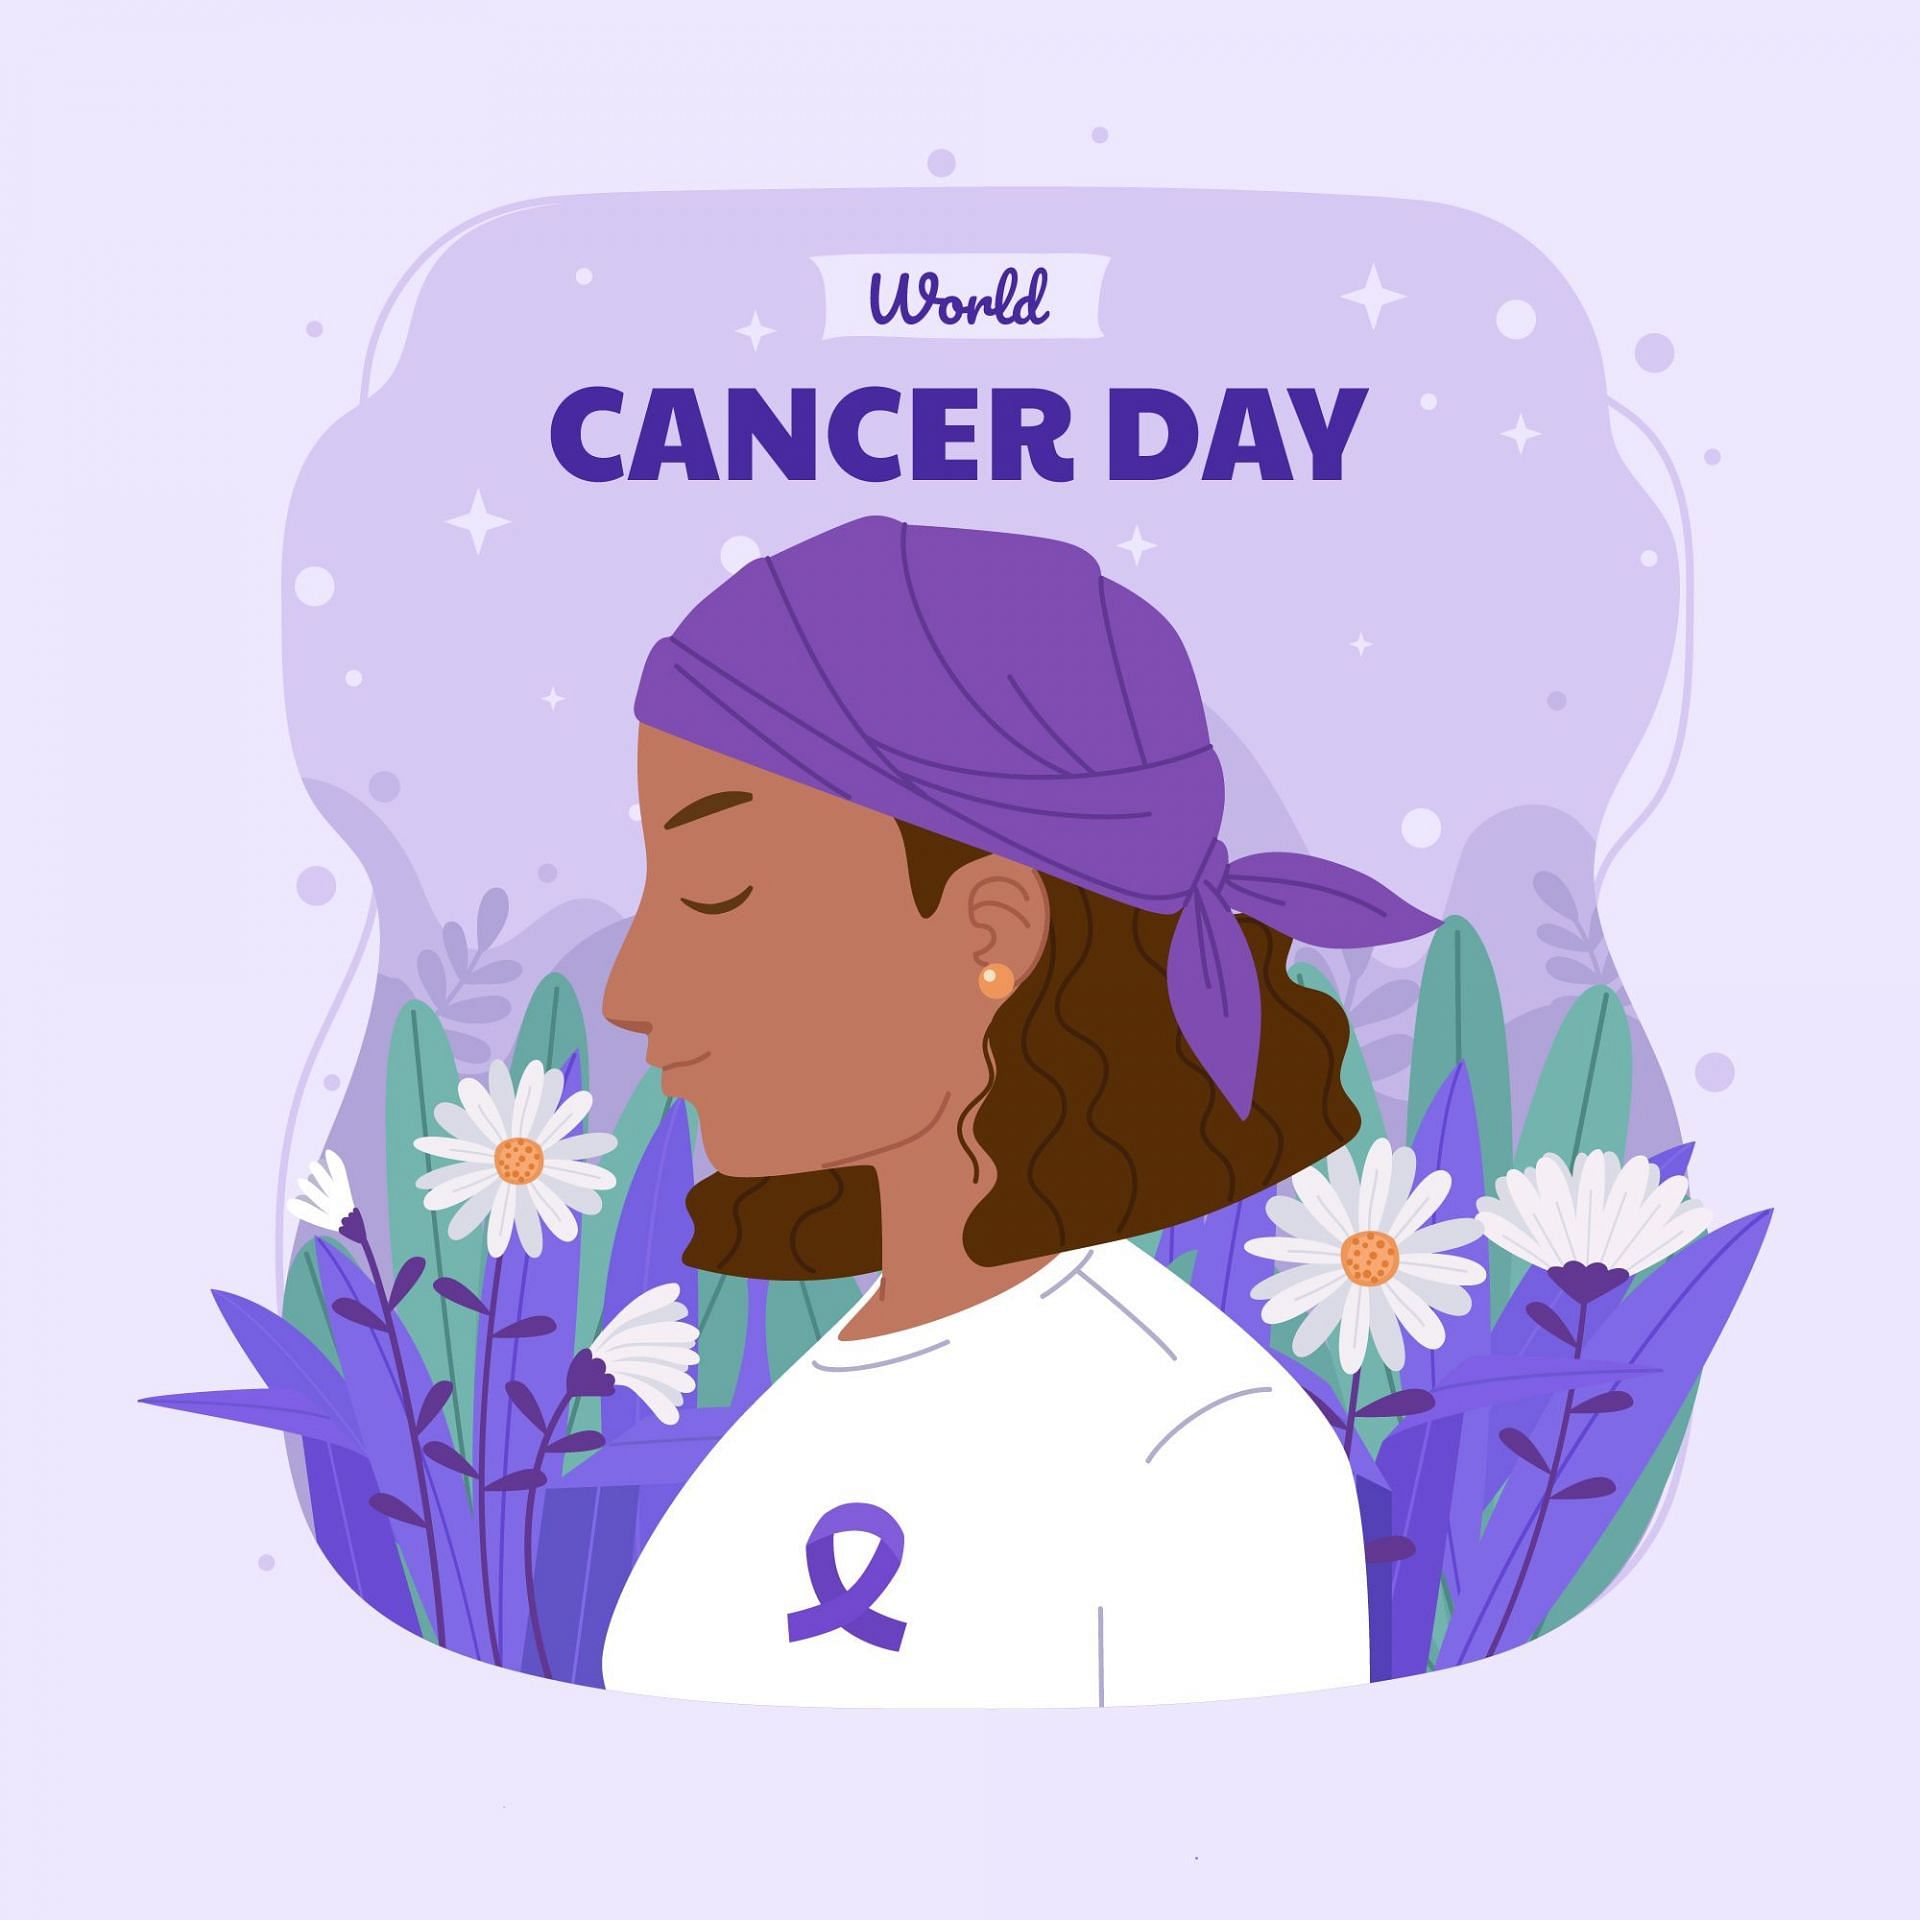 World Cancer Day is a reminder of the survivors and those we have lost in the way. (Image via Freepik/Freepik)